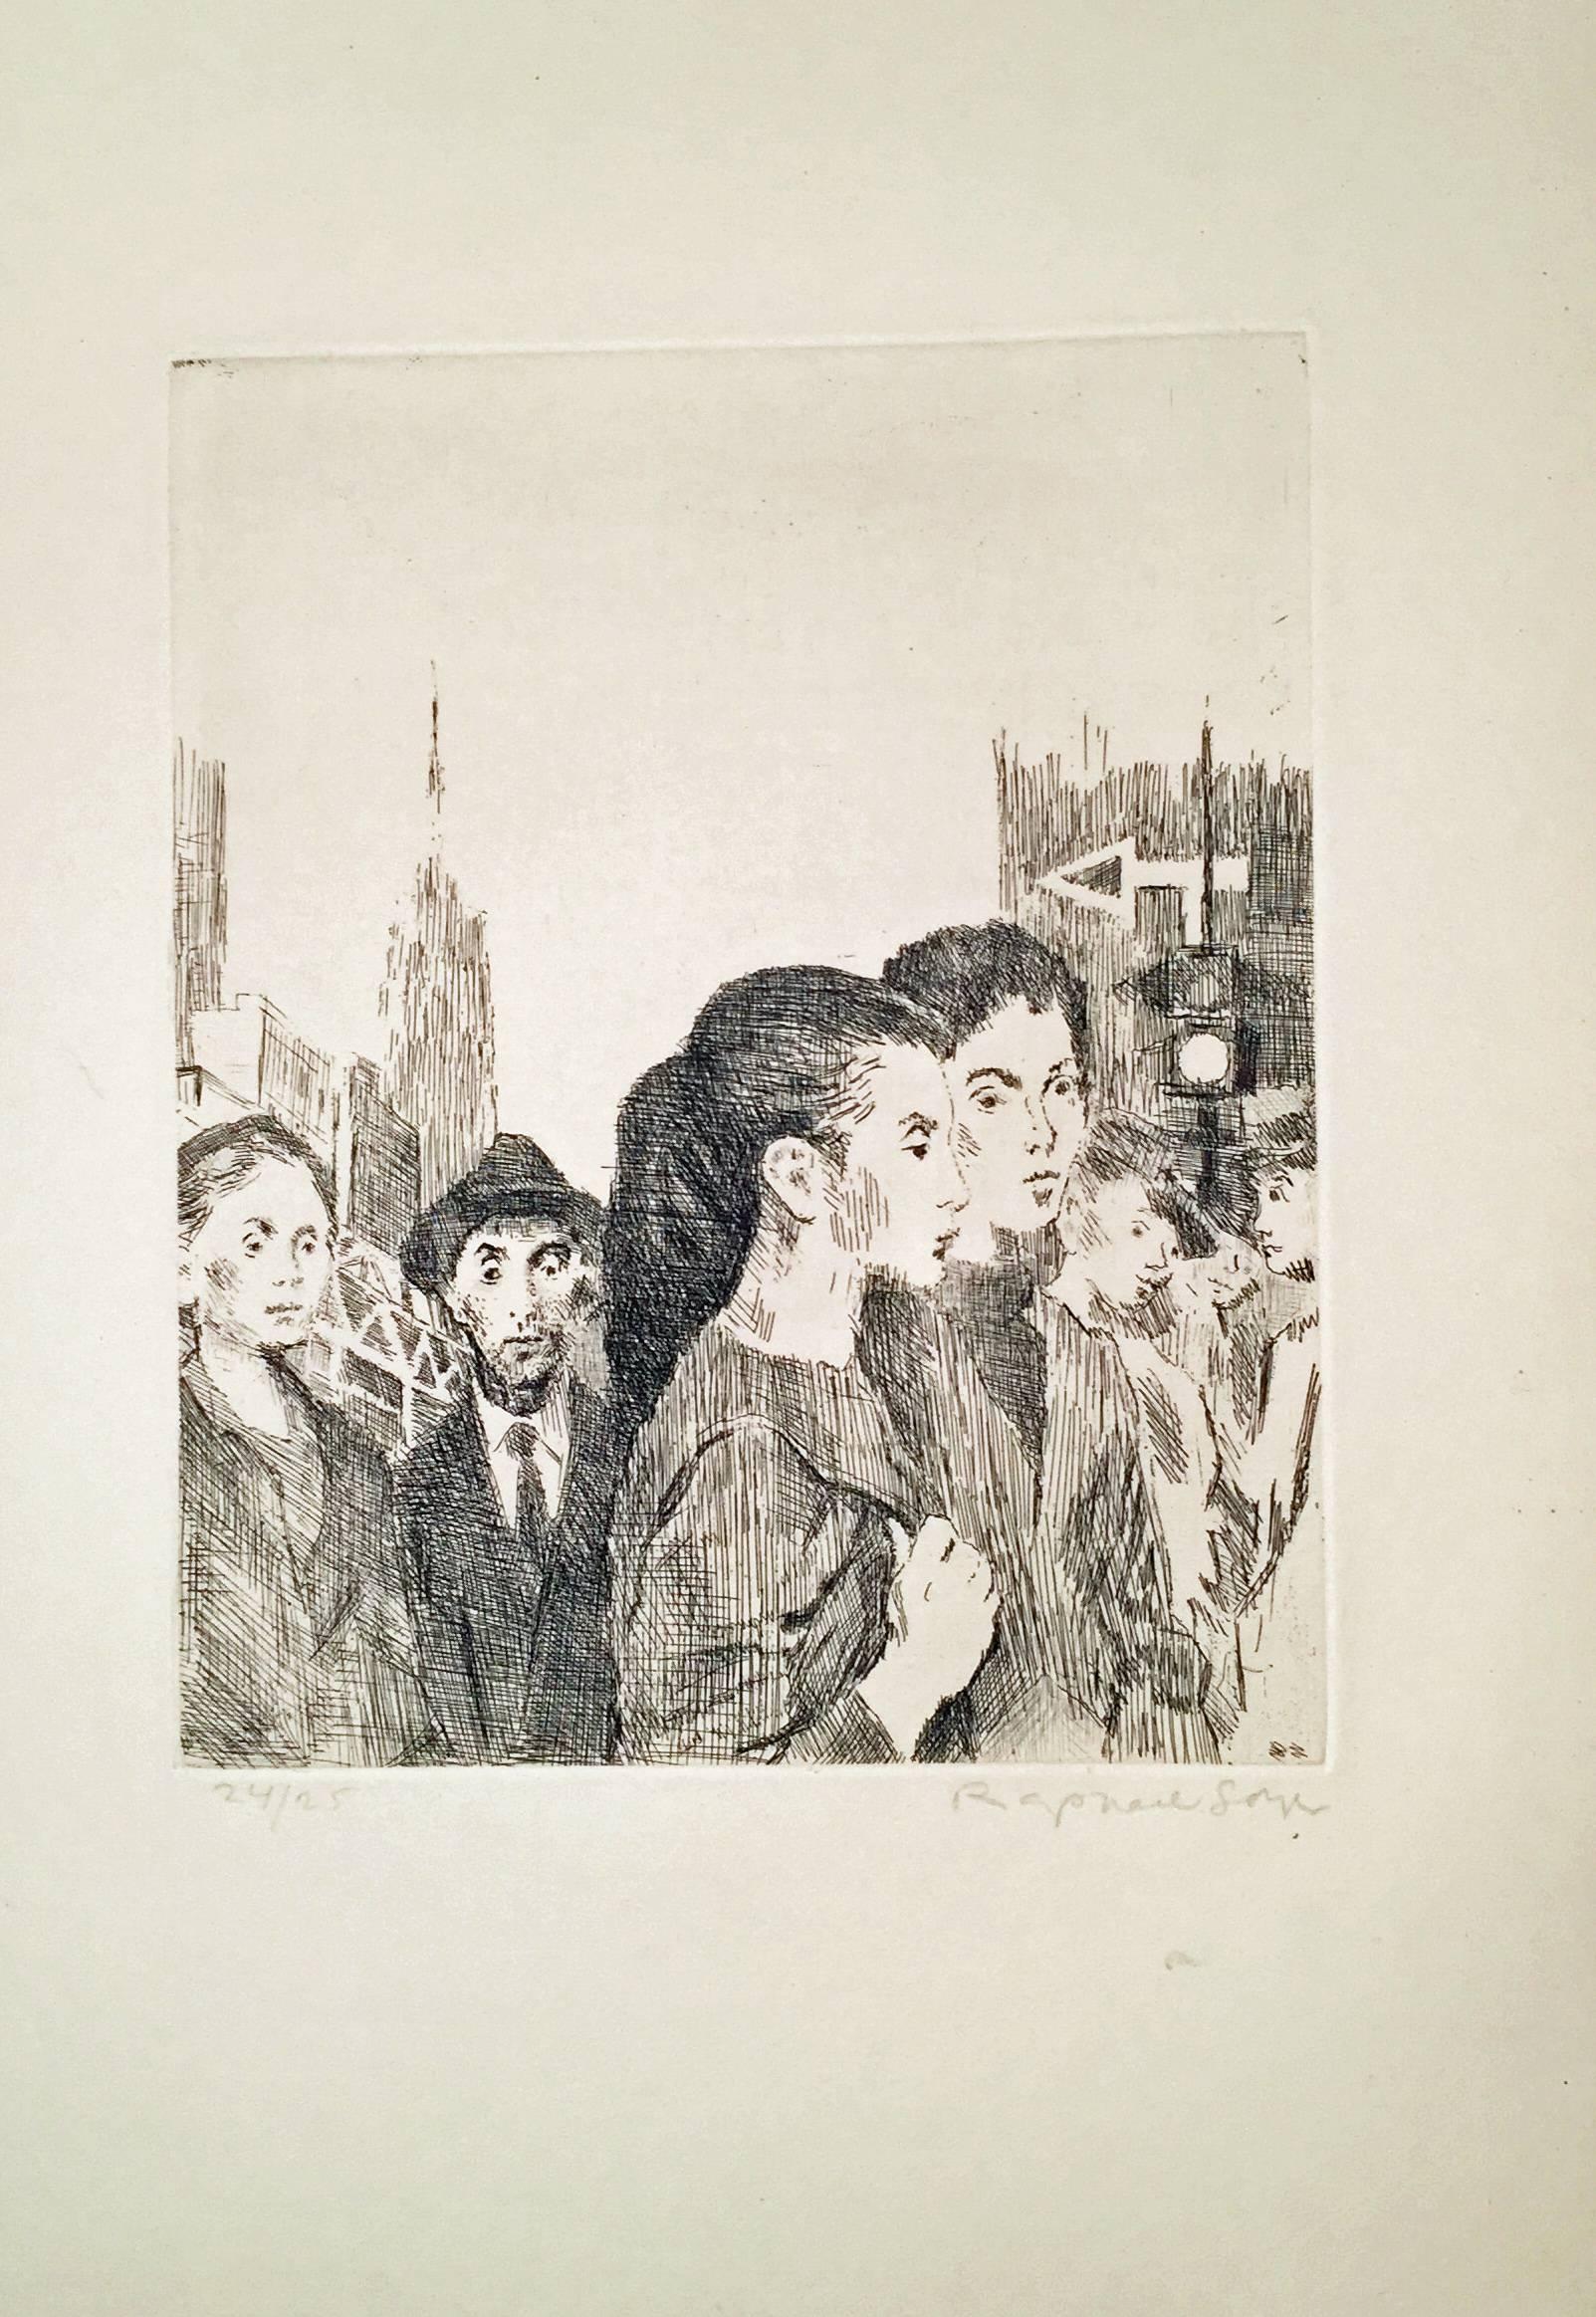 Soyer, Raphael. SIXTEEN ETCHINGS. 
Published by Associated American Artists, NY, 1965. 
From the Deluxe suite of 25 on Japan paper, this copy number 24/25. (There were a further 60 printed on BFK Rives paper, of which numbers 26/85 through 50/85